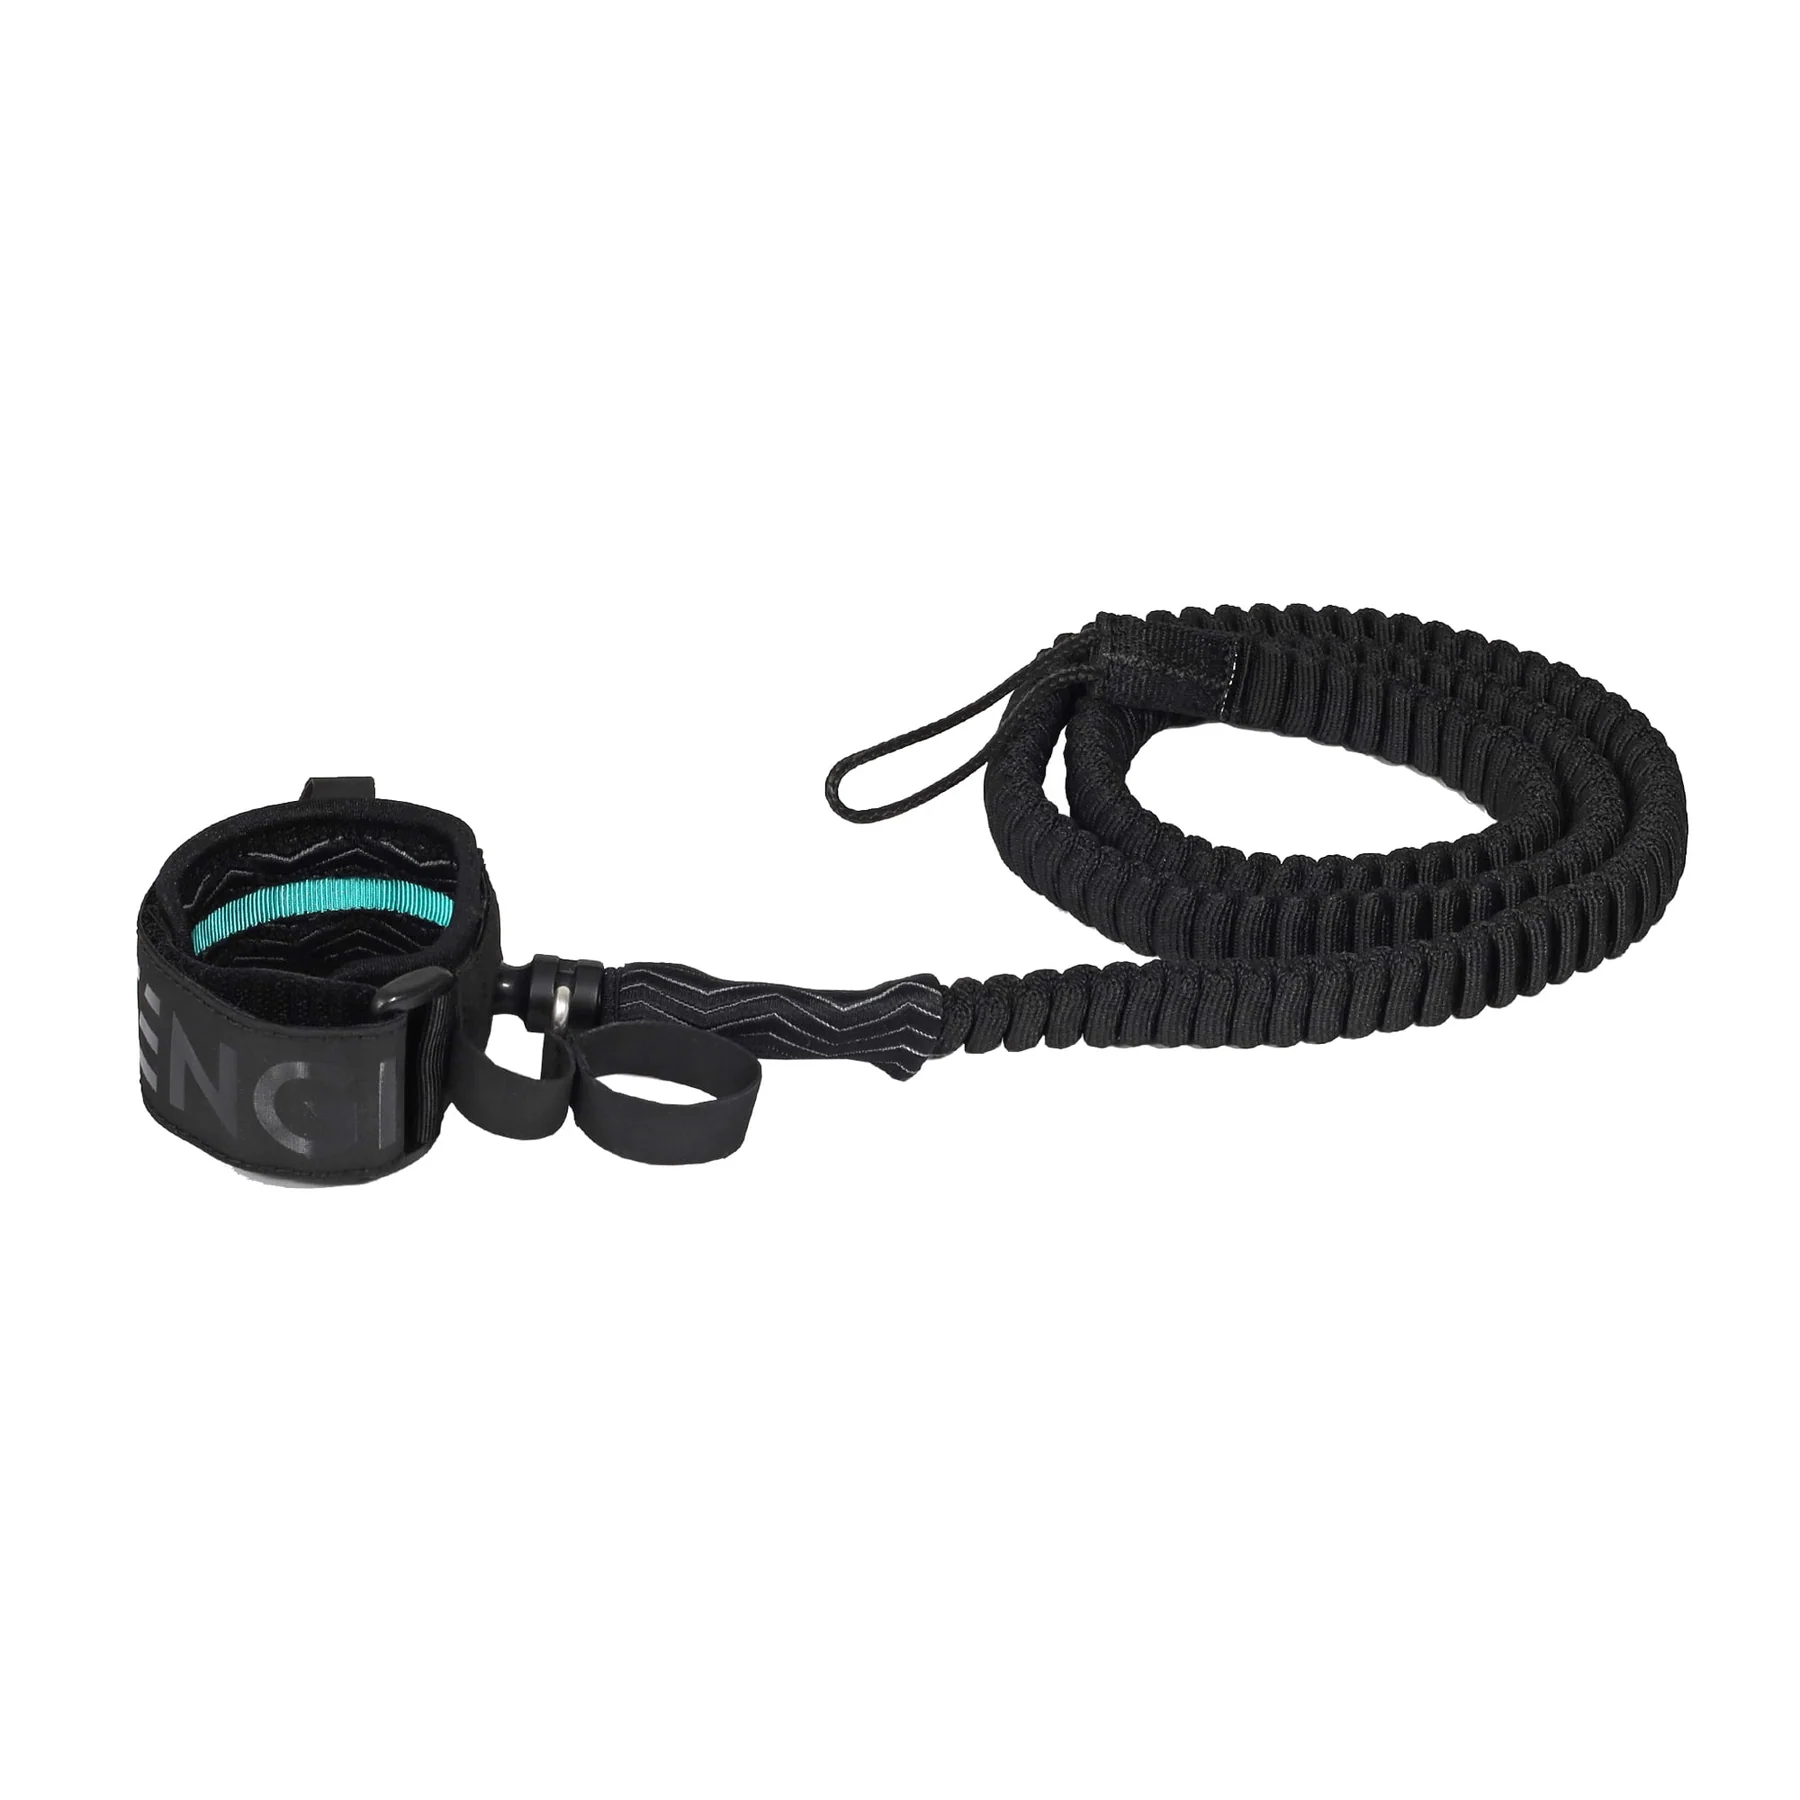 Ride Engine Quick Release Bungee Wrist Leash